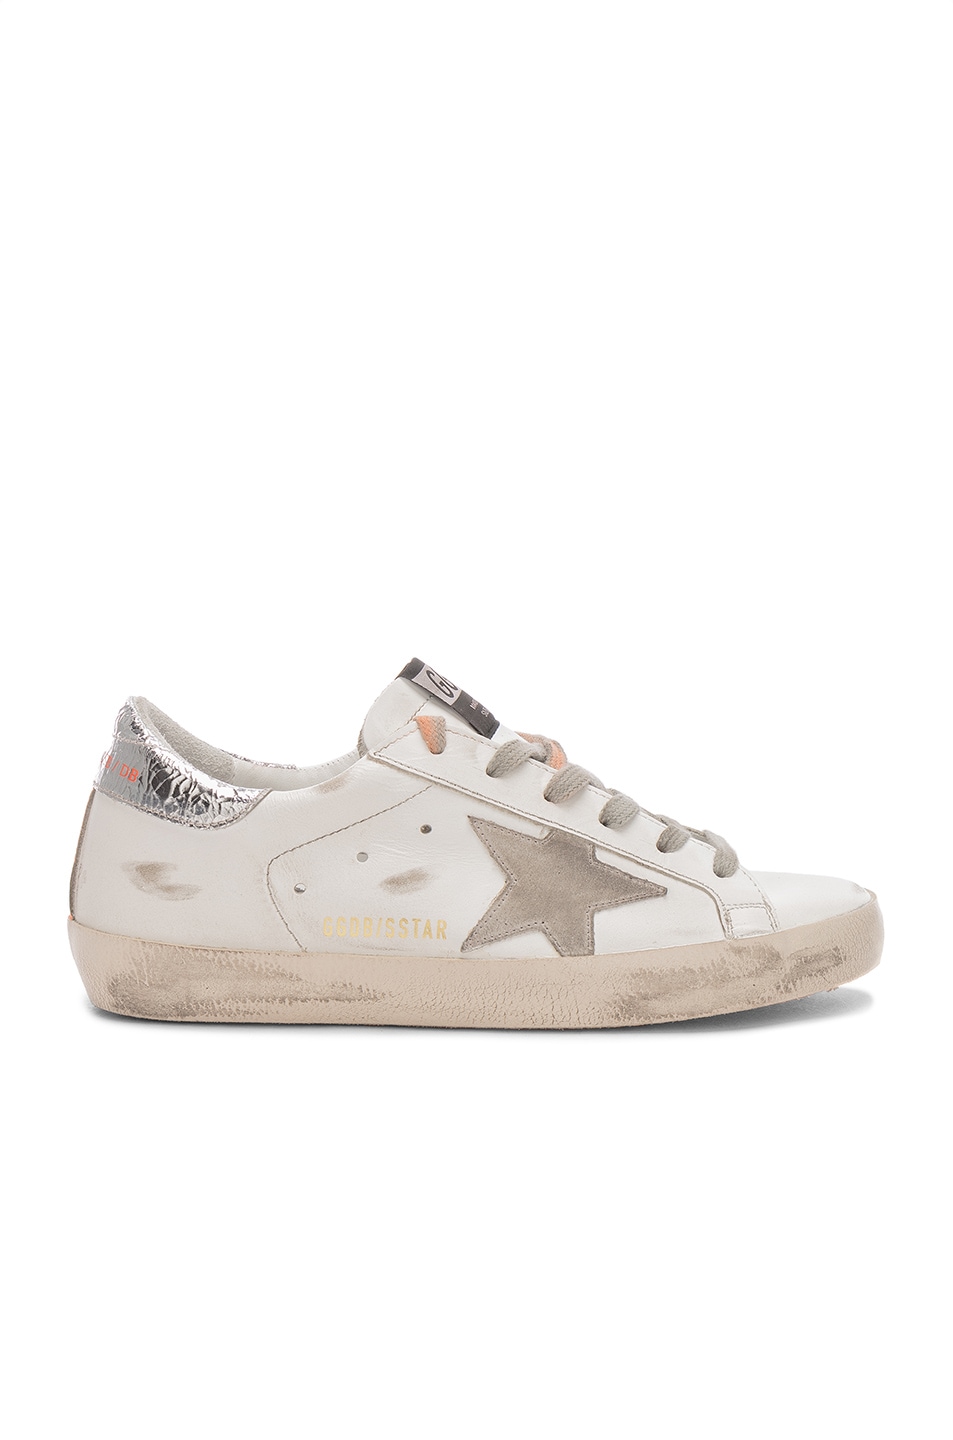 Image 1 of Golden Goose Superstar Sneakers in White Leather & Orange Fluo Sole